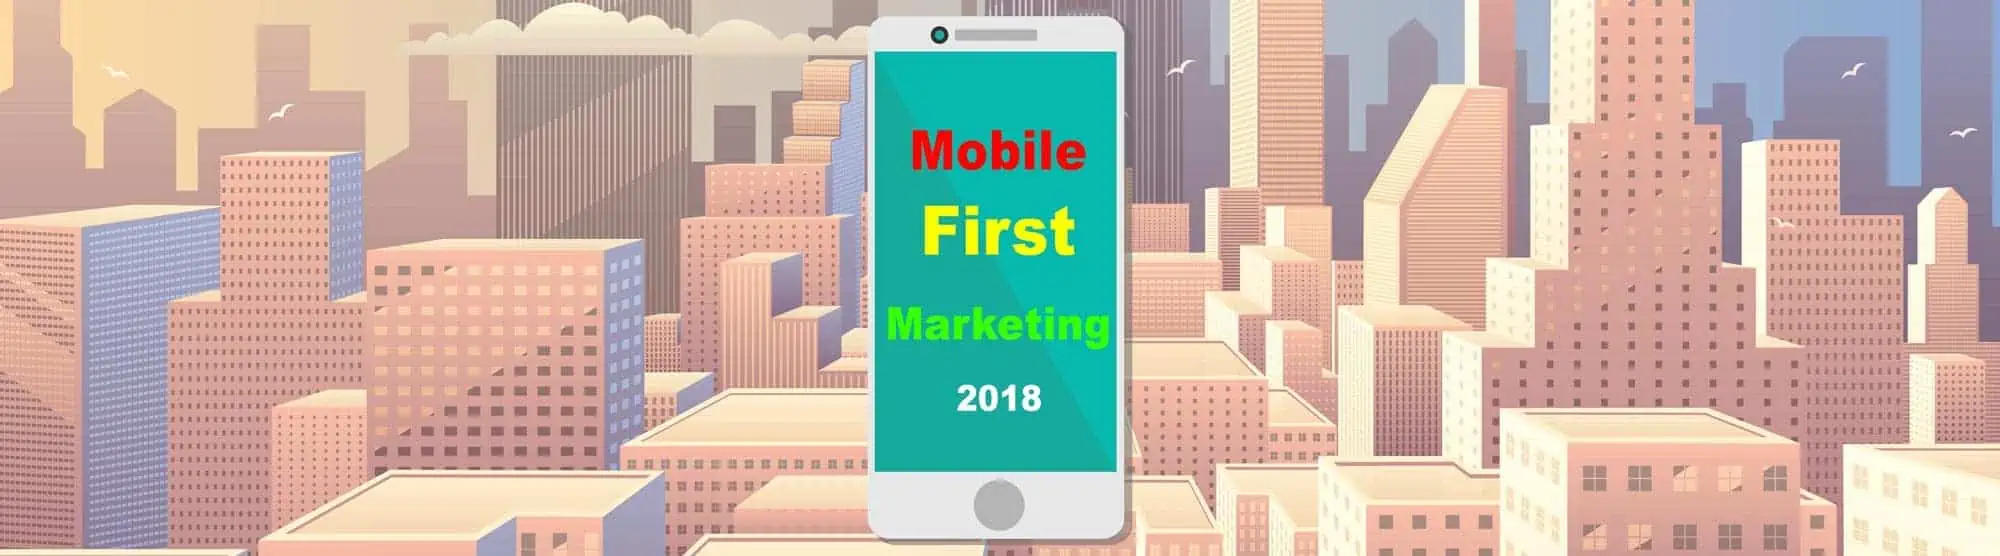 Online ordering mobile first marketing